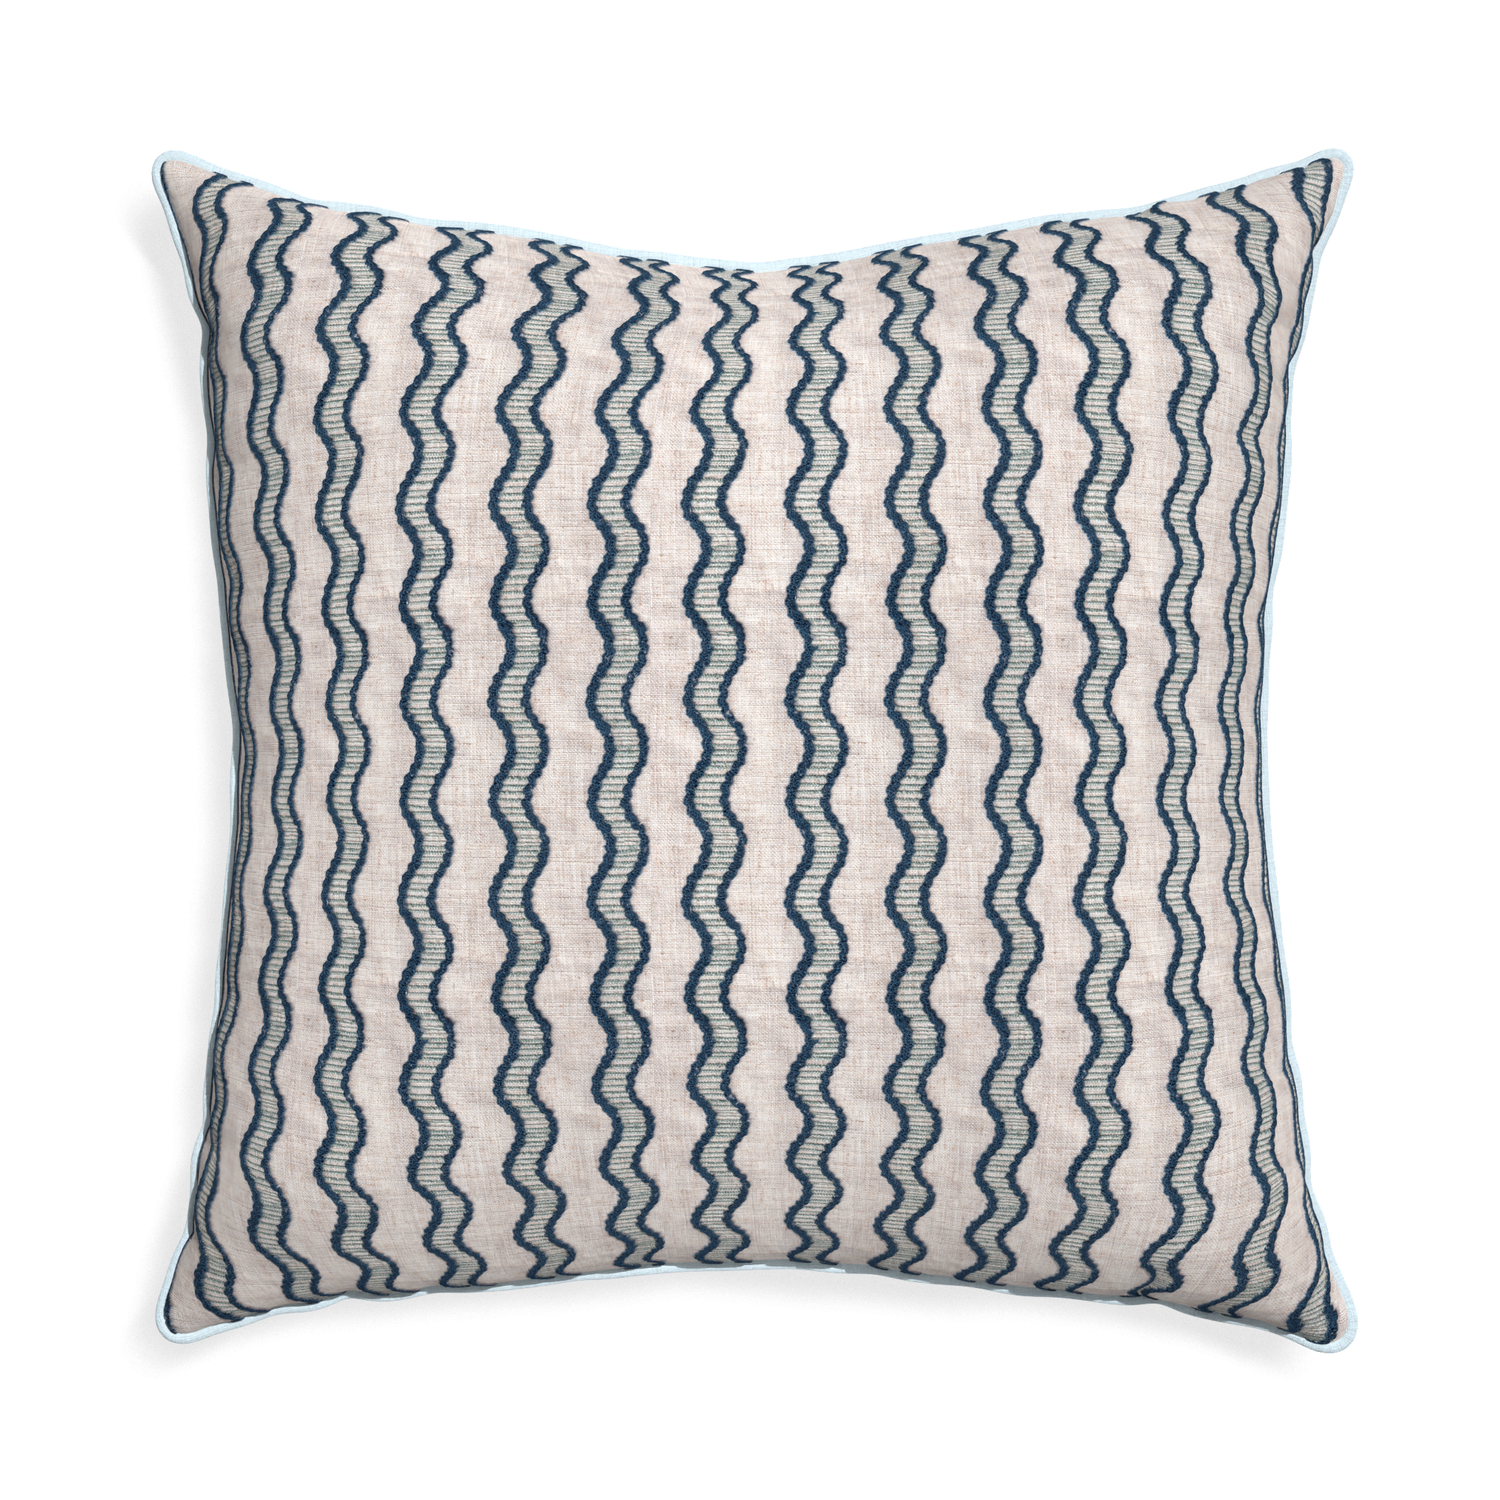 Euro-sham beatrice custom embroidered wavepillow with powder piping on white background